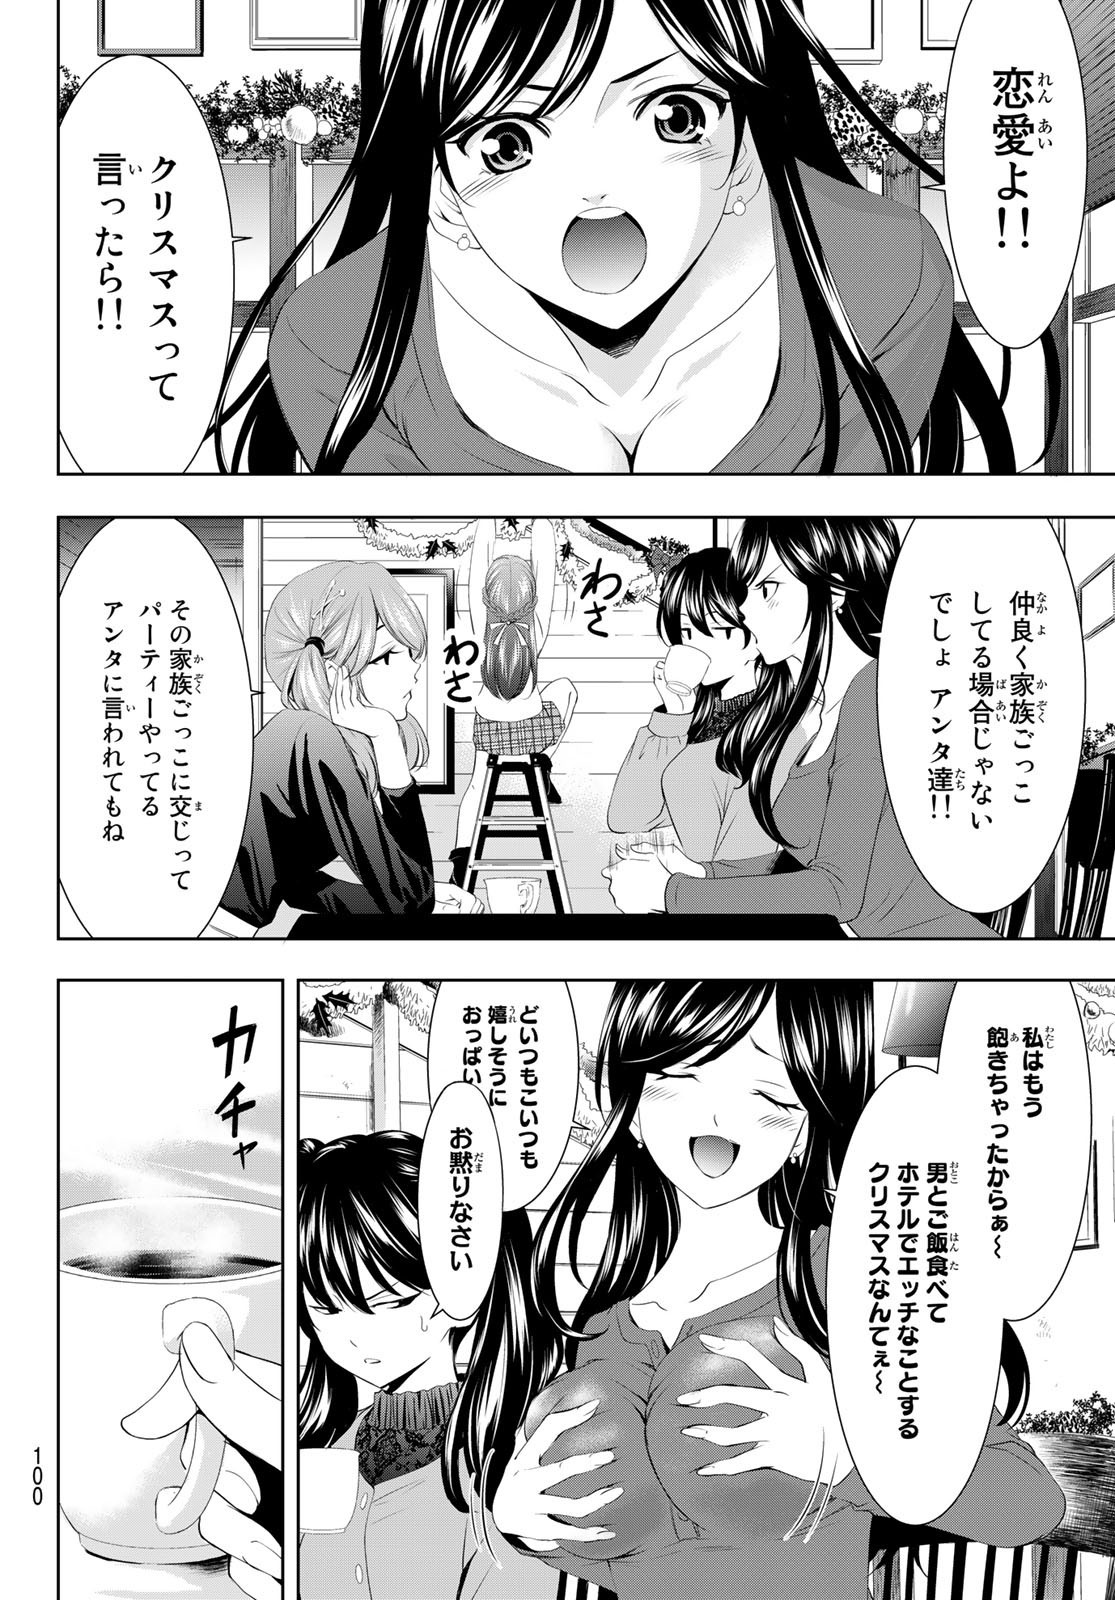 Goddess-Cafe-Terrace - Chapter 076 - Page 4